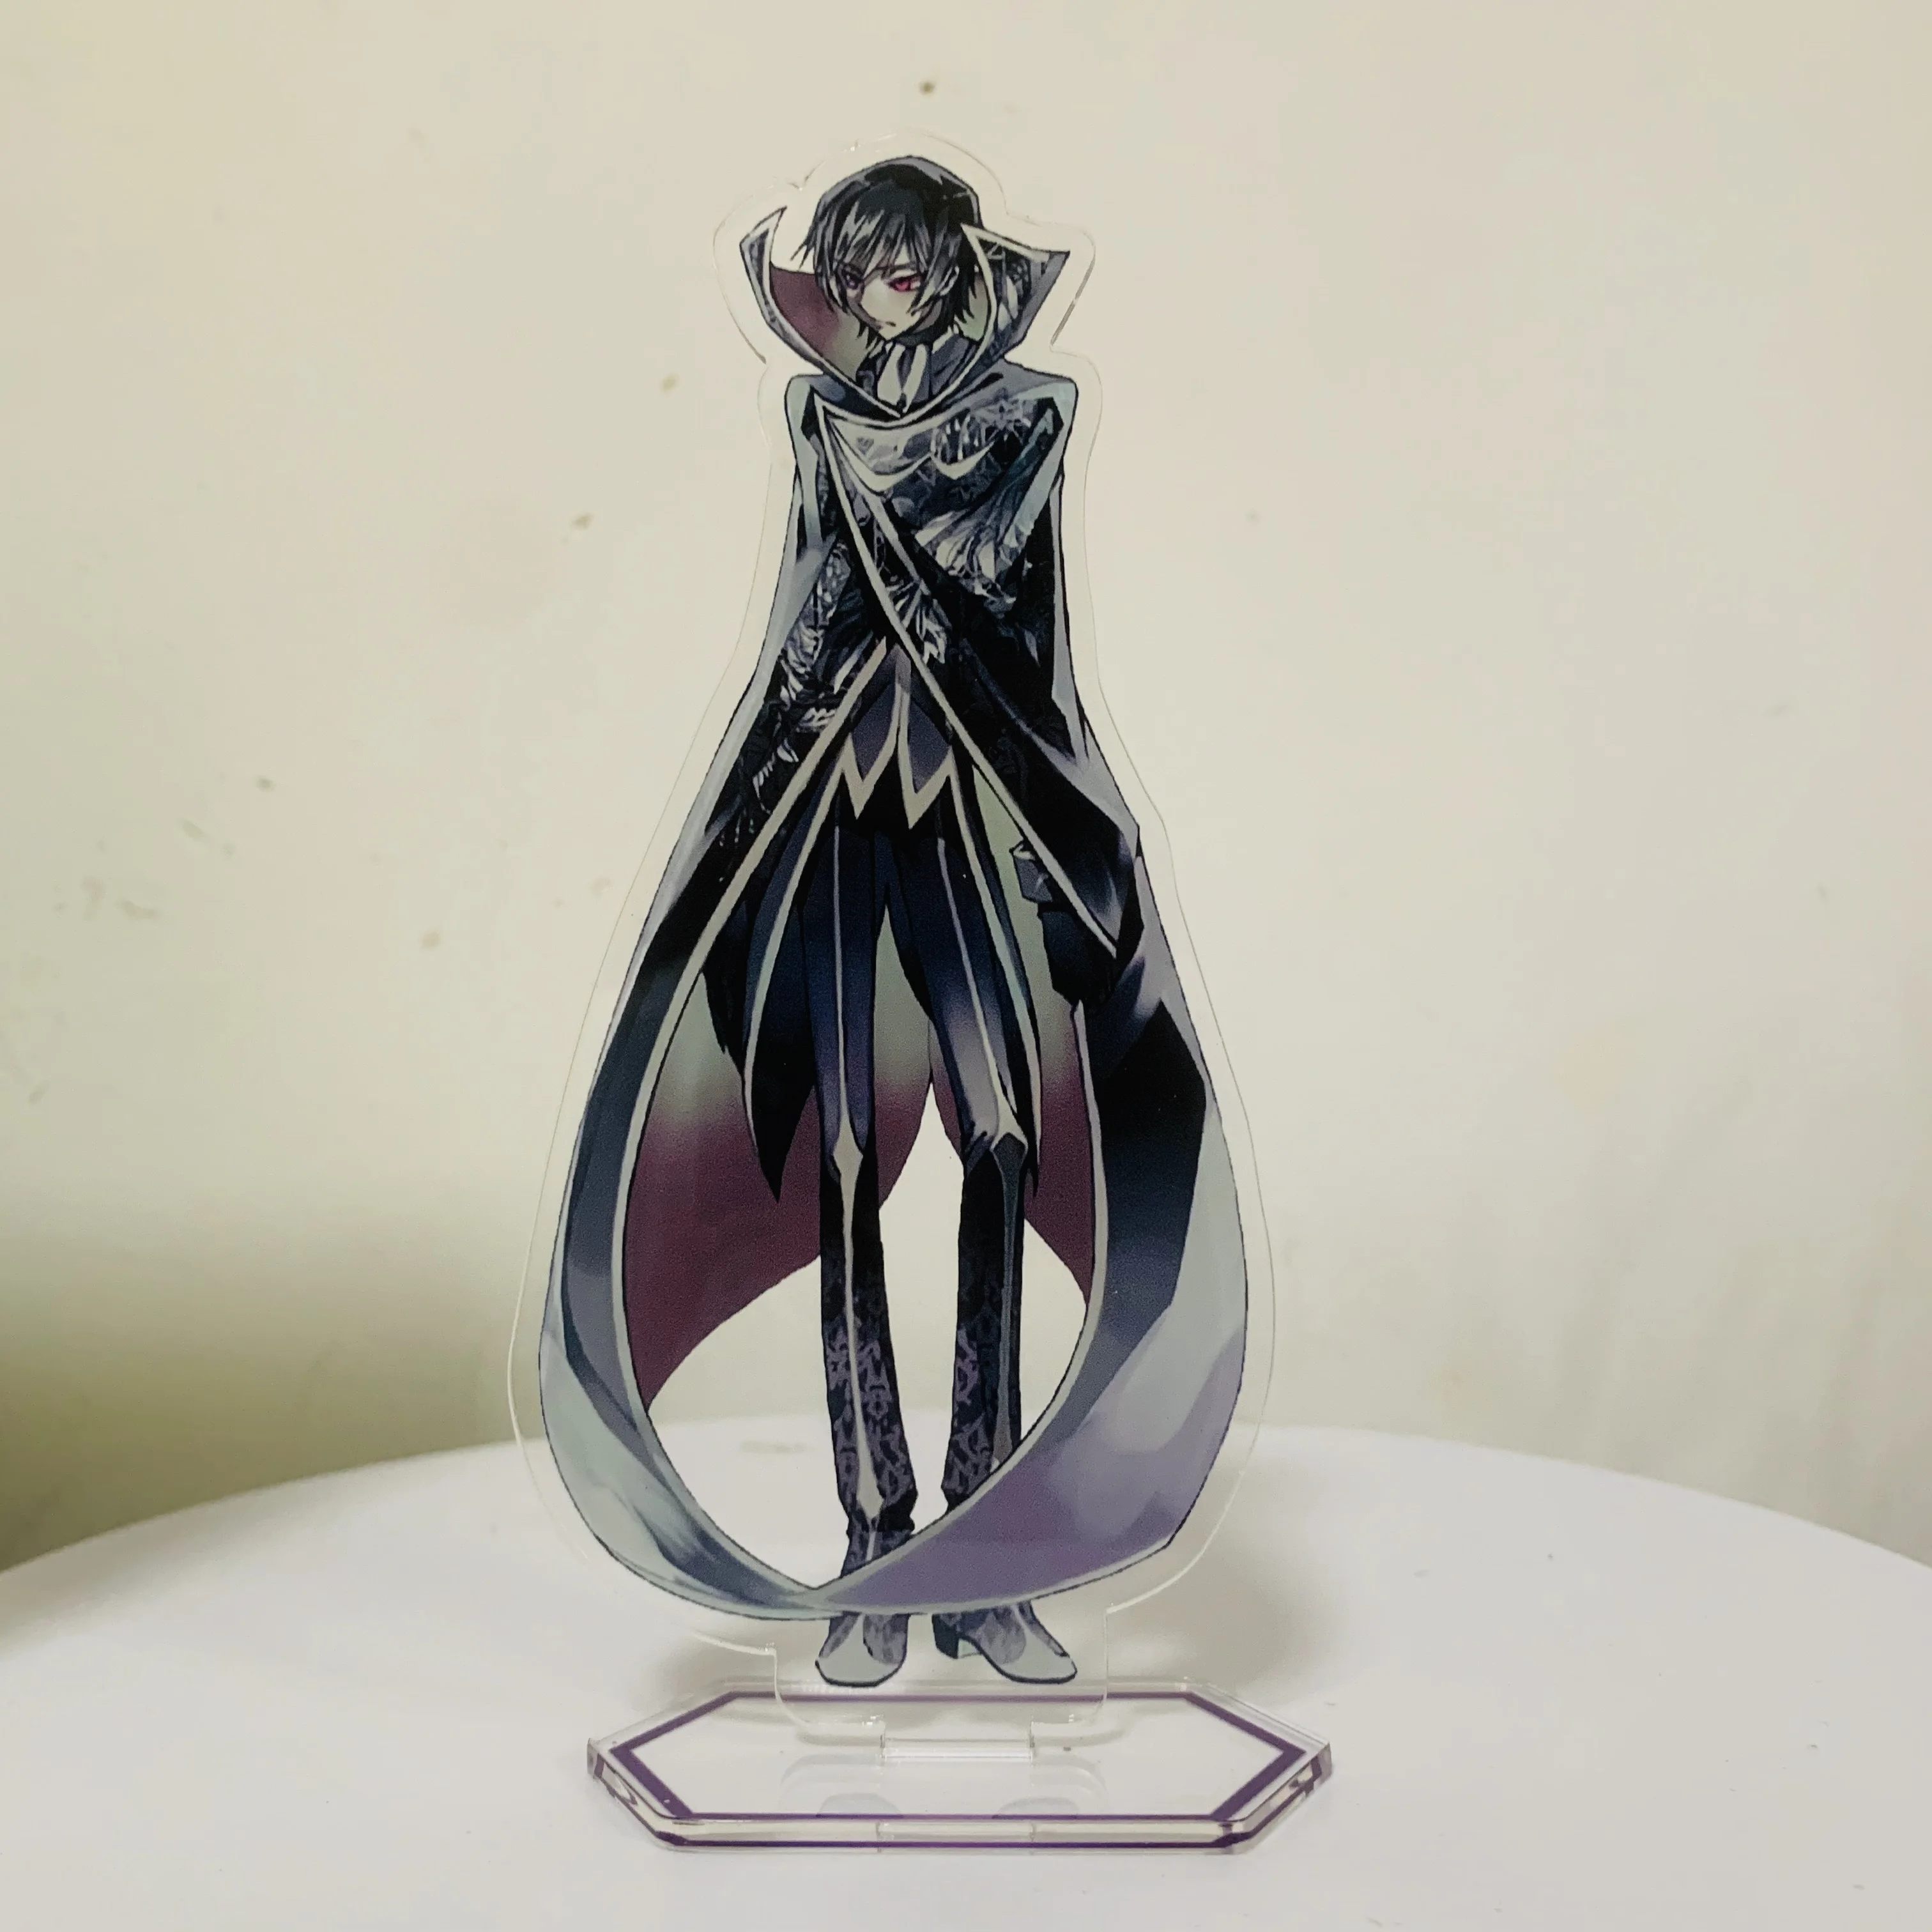 

CODE GEASS Anime Figure Lelouch Lamperouge Acrylic Stands knight of seven Character Model Plate Desk Decor Standing Sign Toys